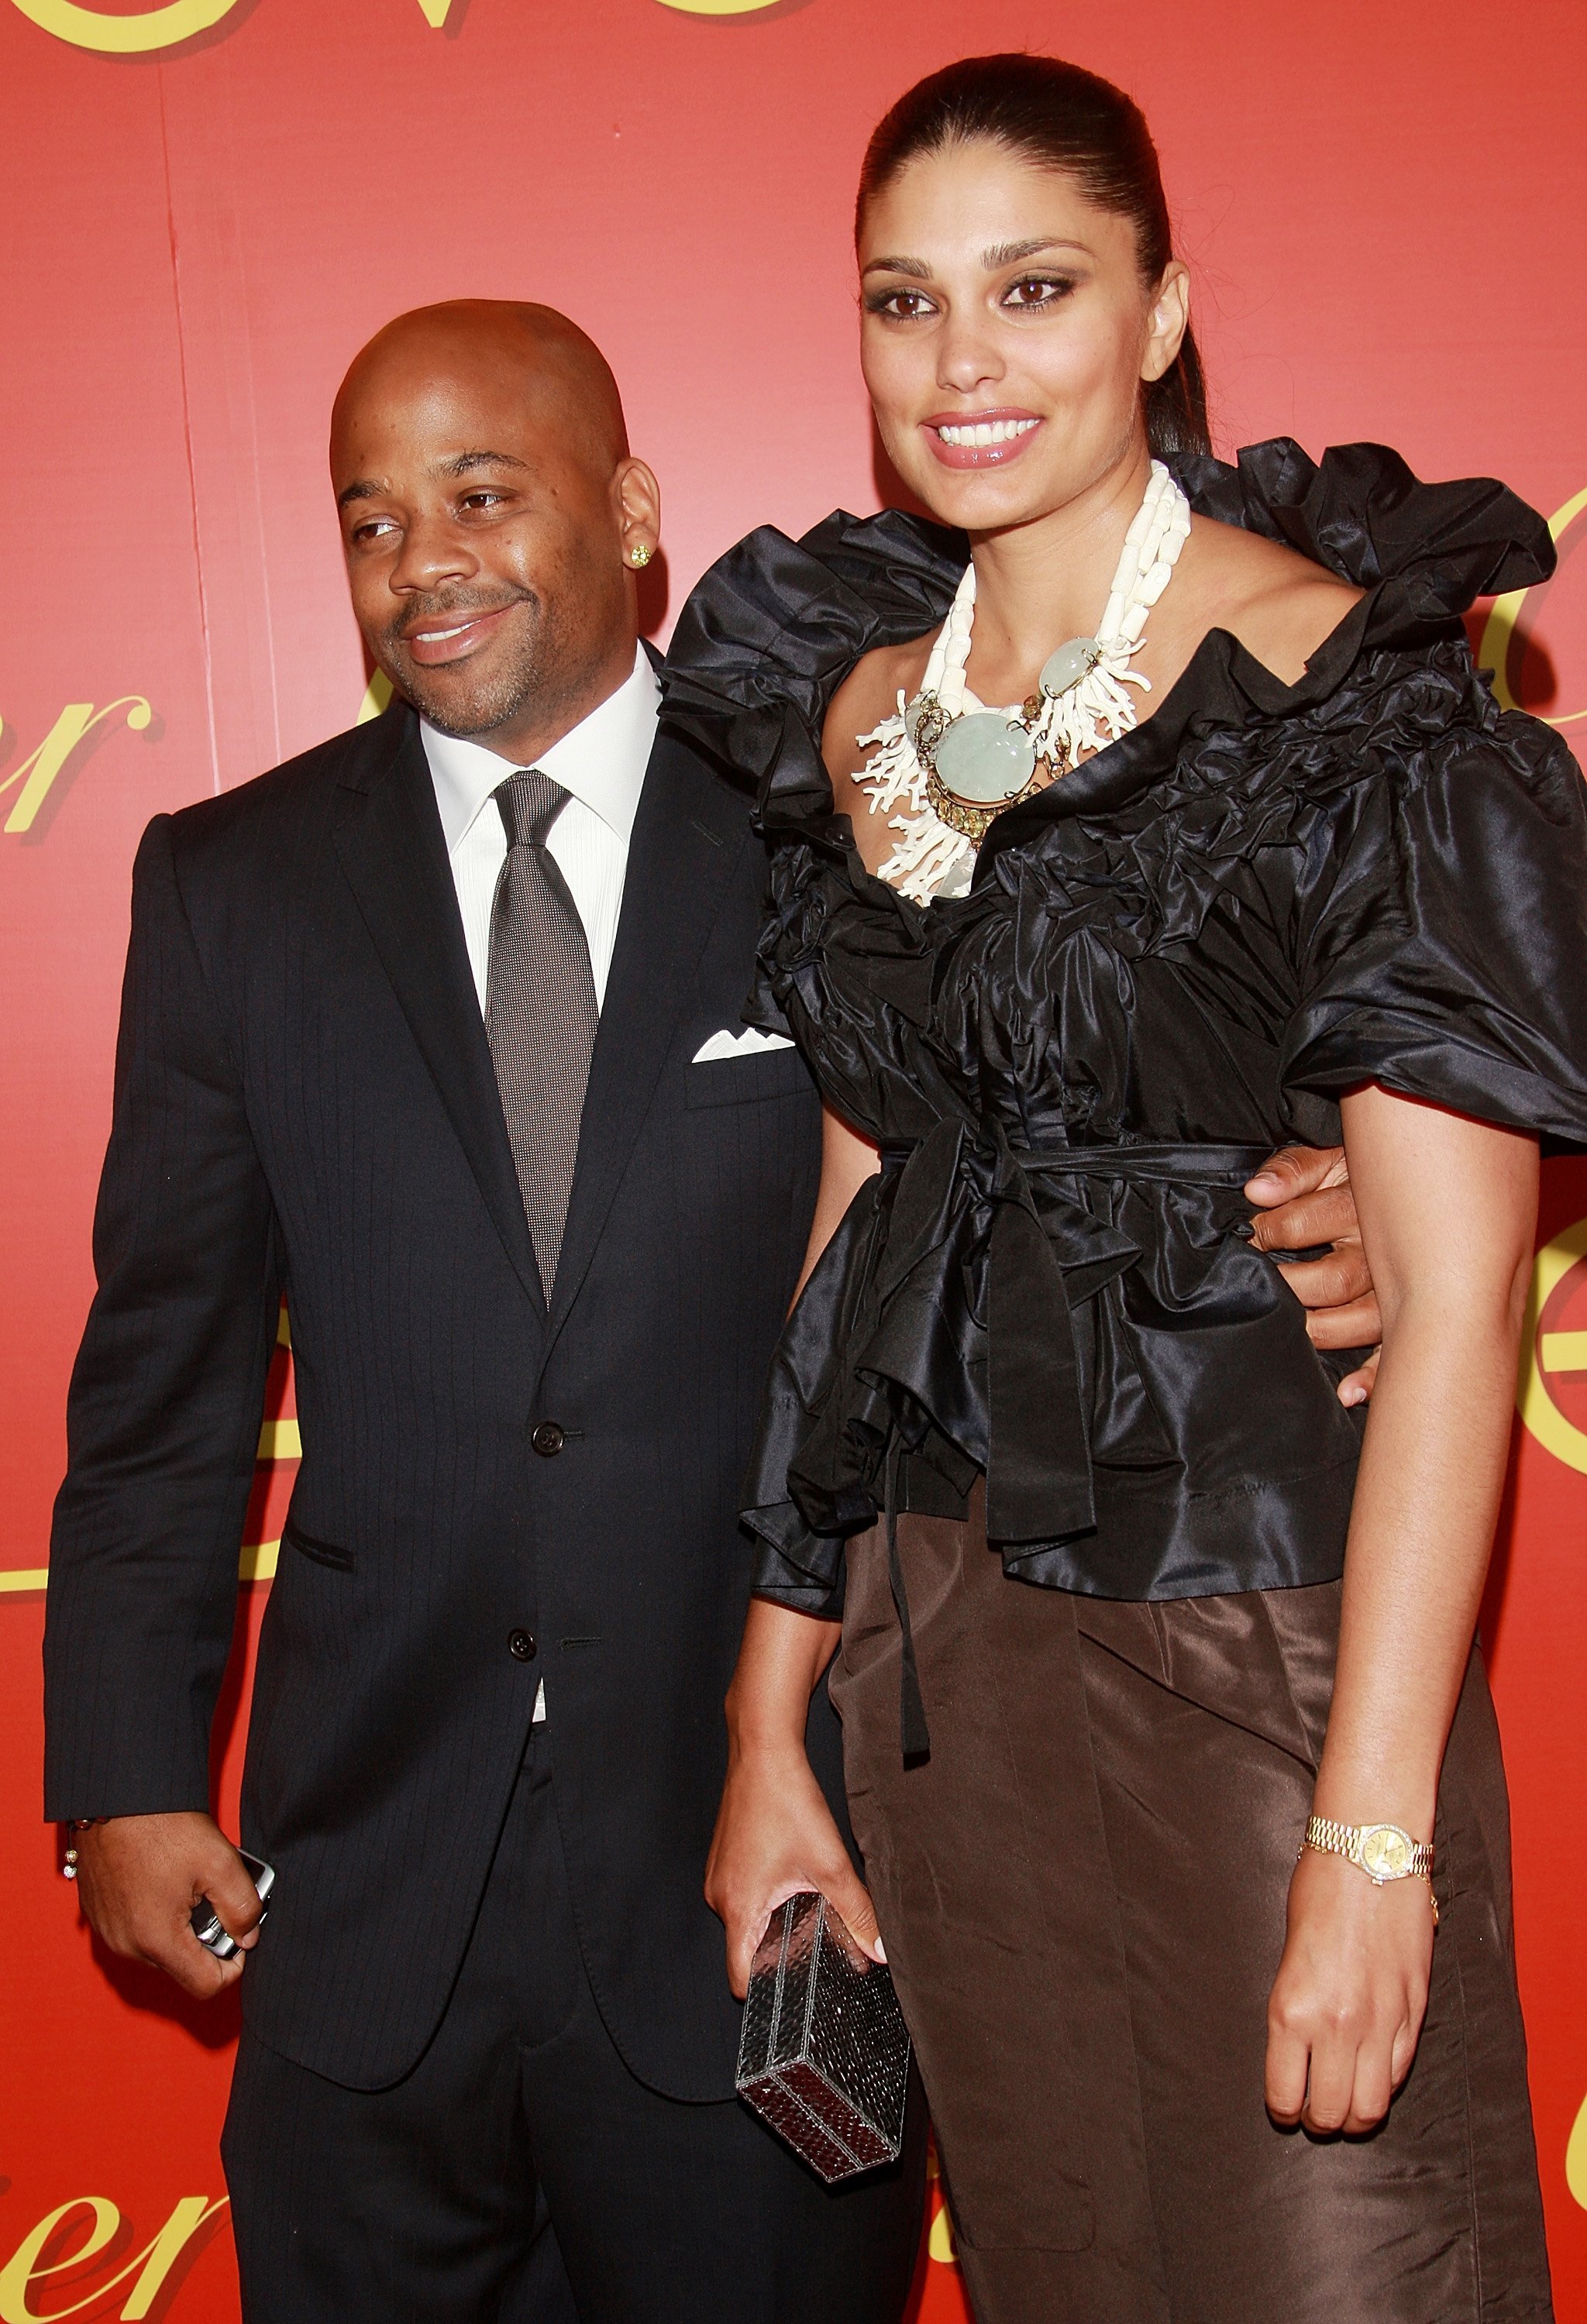 Damon Dash and Rachel Roy attend a cocktail party in celebration of The Cartier Charity Love Bracelet at The Cartier Mansion, June 7, 2007, in New York City. | Source: Getty Images.